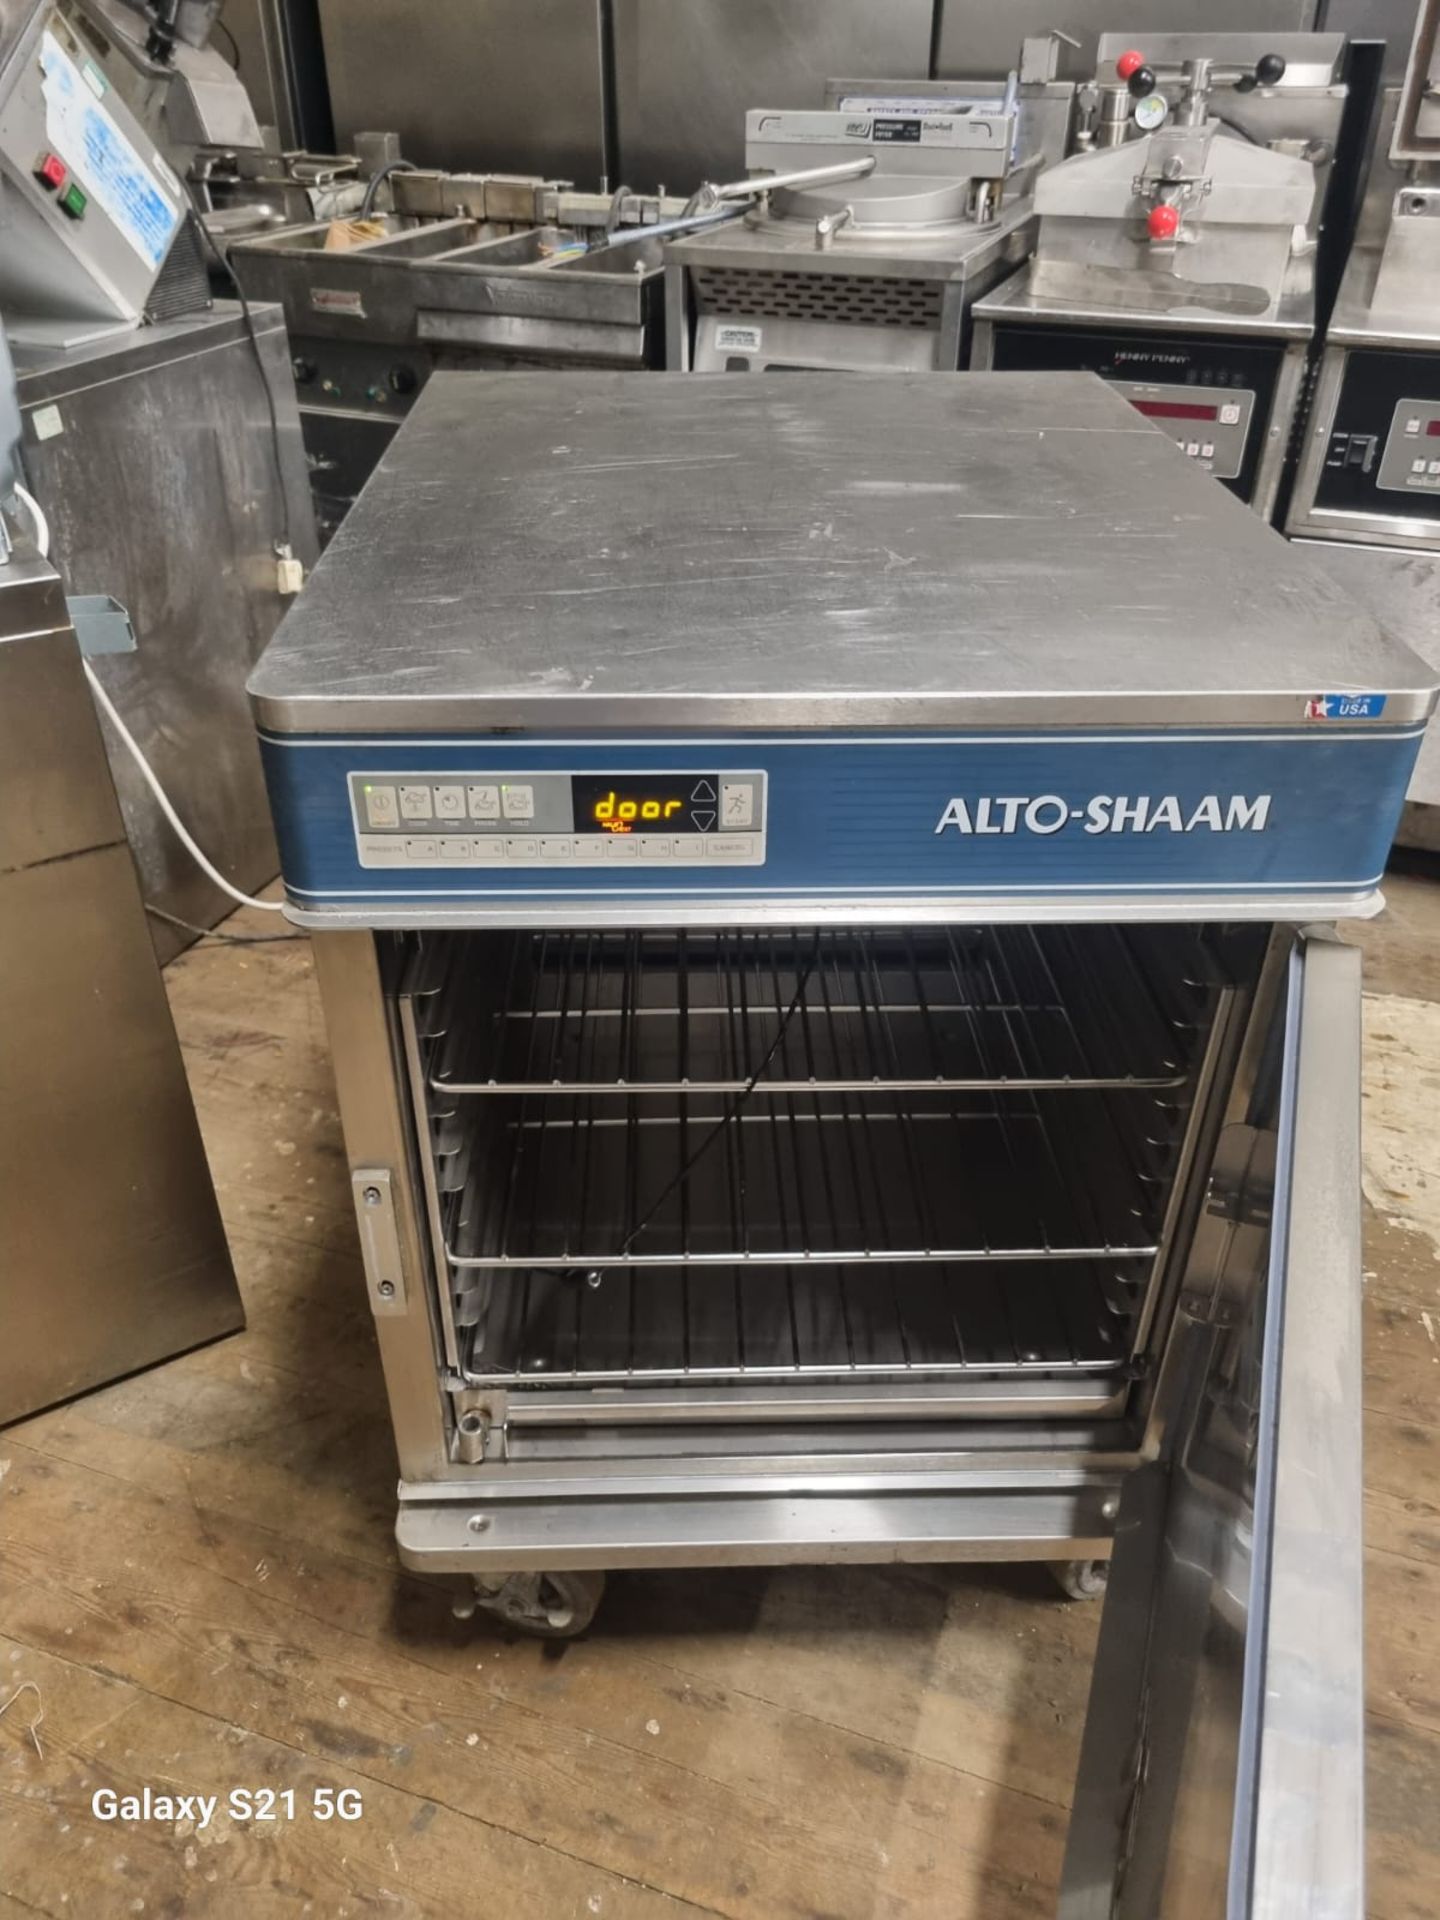 ALTO SHAAM 750-TH-Iii COOK AND HOLD - NEVER BEEN USED - 13 AMP PLUG  - Image 2 of 7